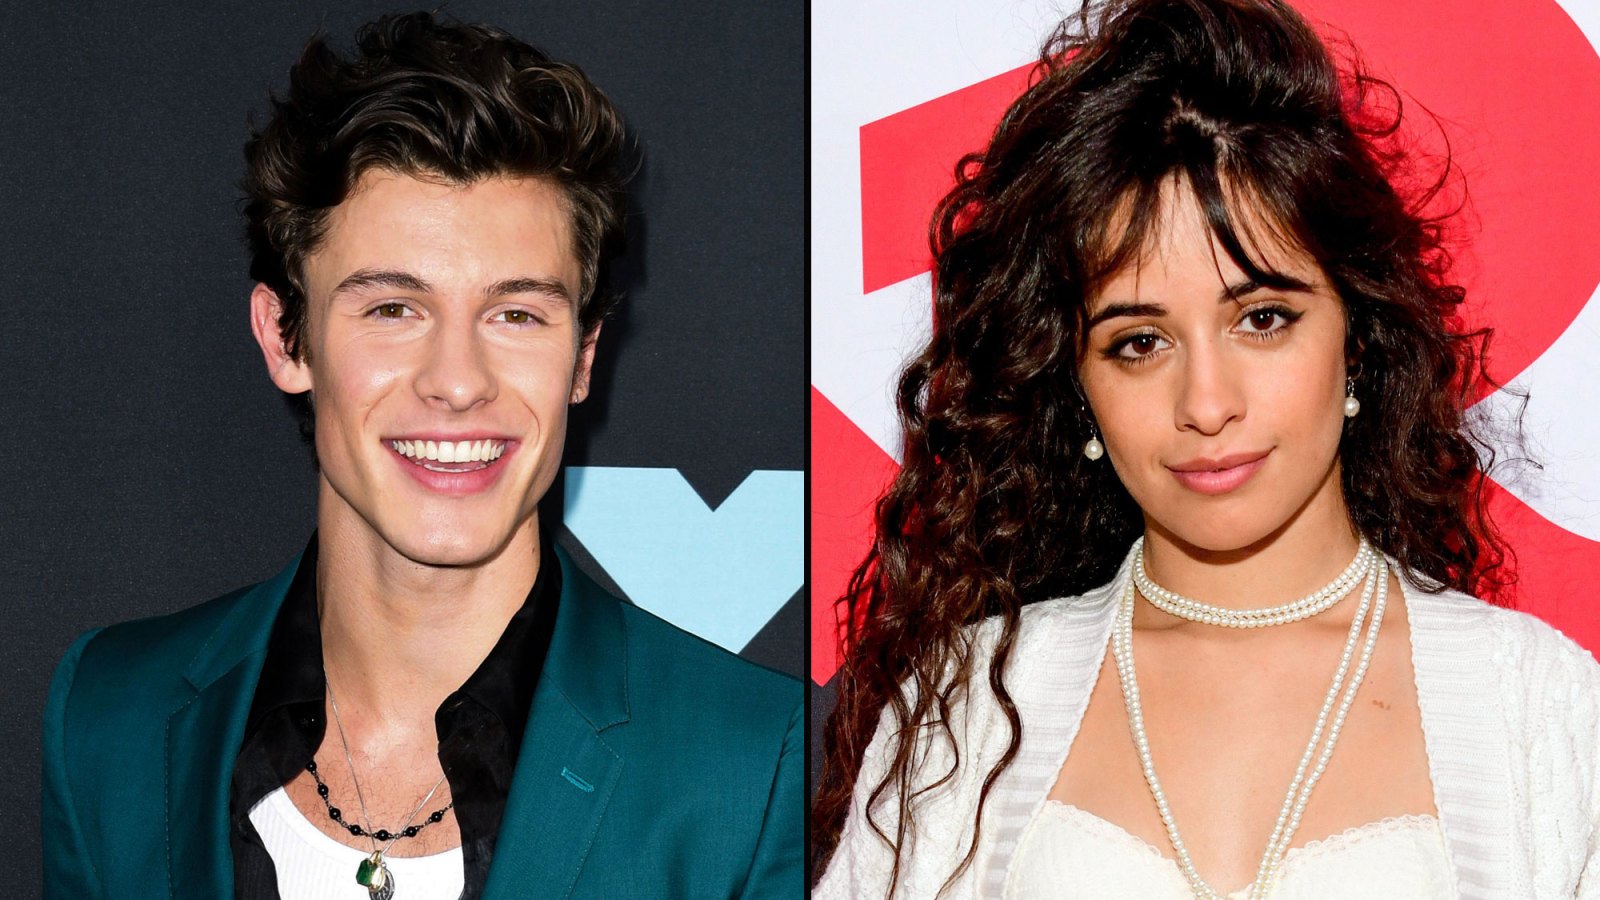 American Music Awards 2019: Shawn Mendes and Camila Cabello to Perform 'Señorita' Together, Halsey Added to Lineup